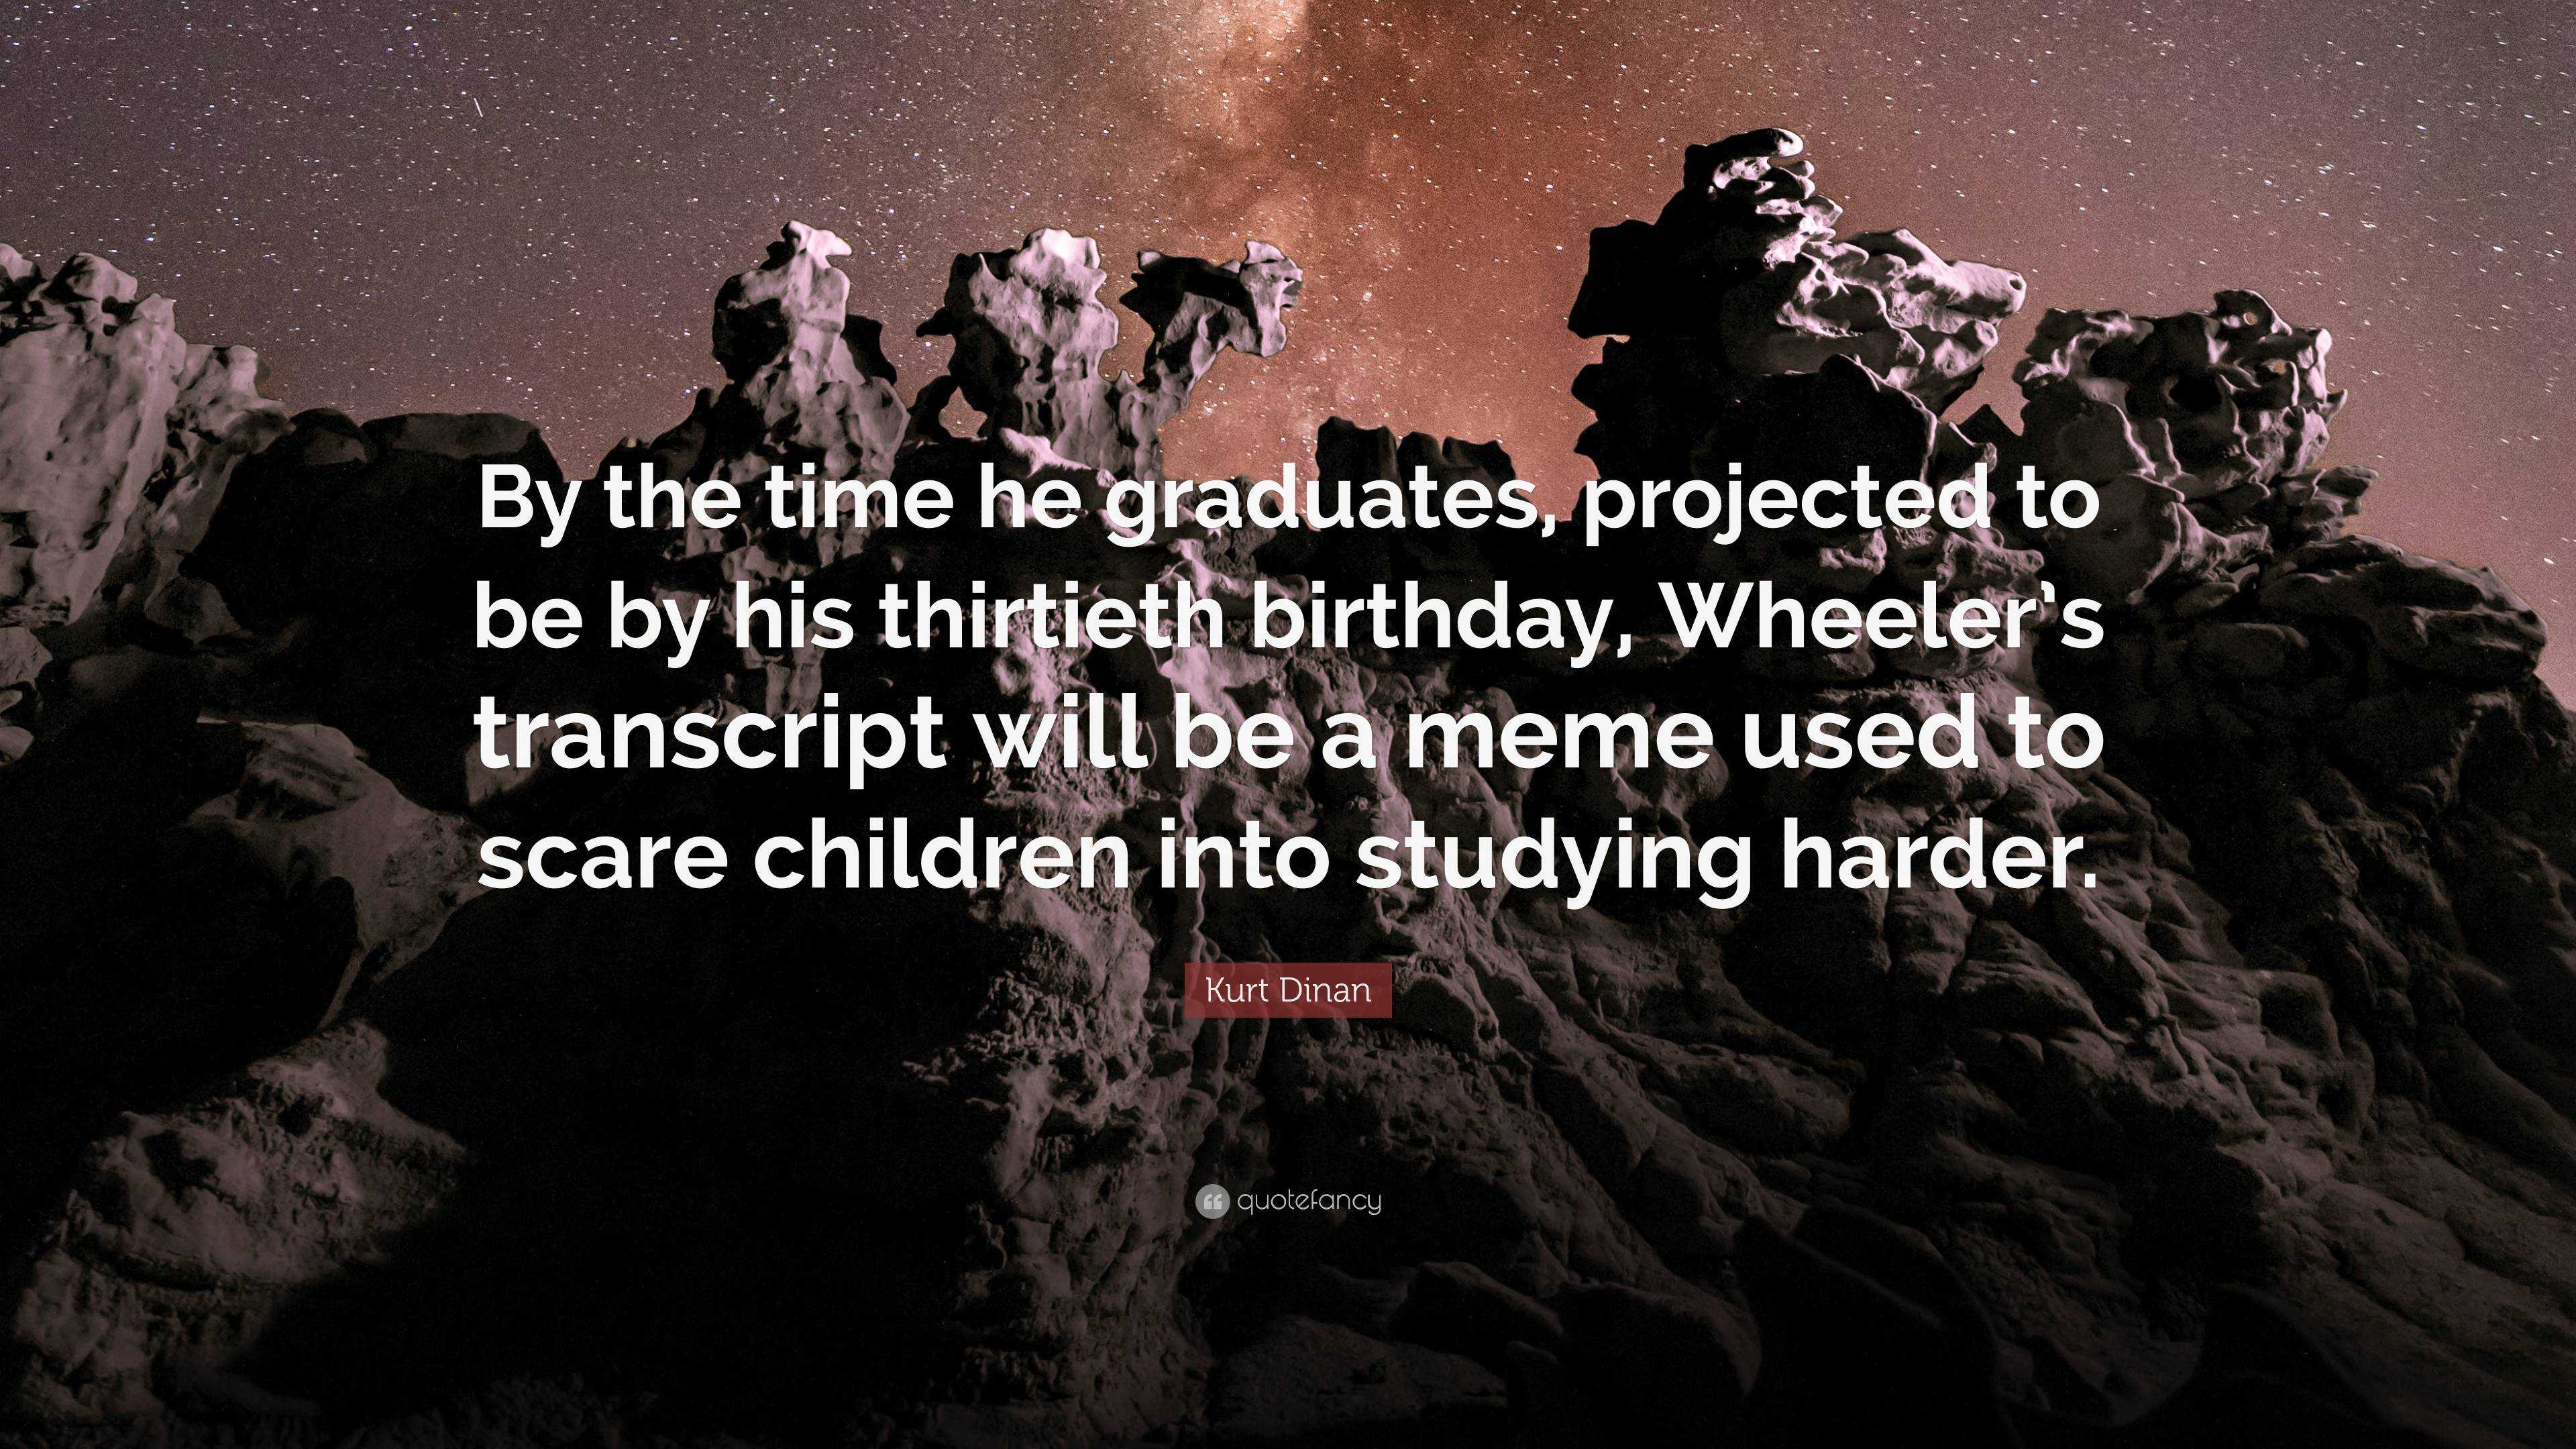 Kurt Dinan Quote: “By the time he graduates, projected to be by his  thirtieth birthday, Wheeler's transcript will be a meme used to scare c...”